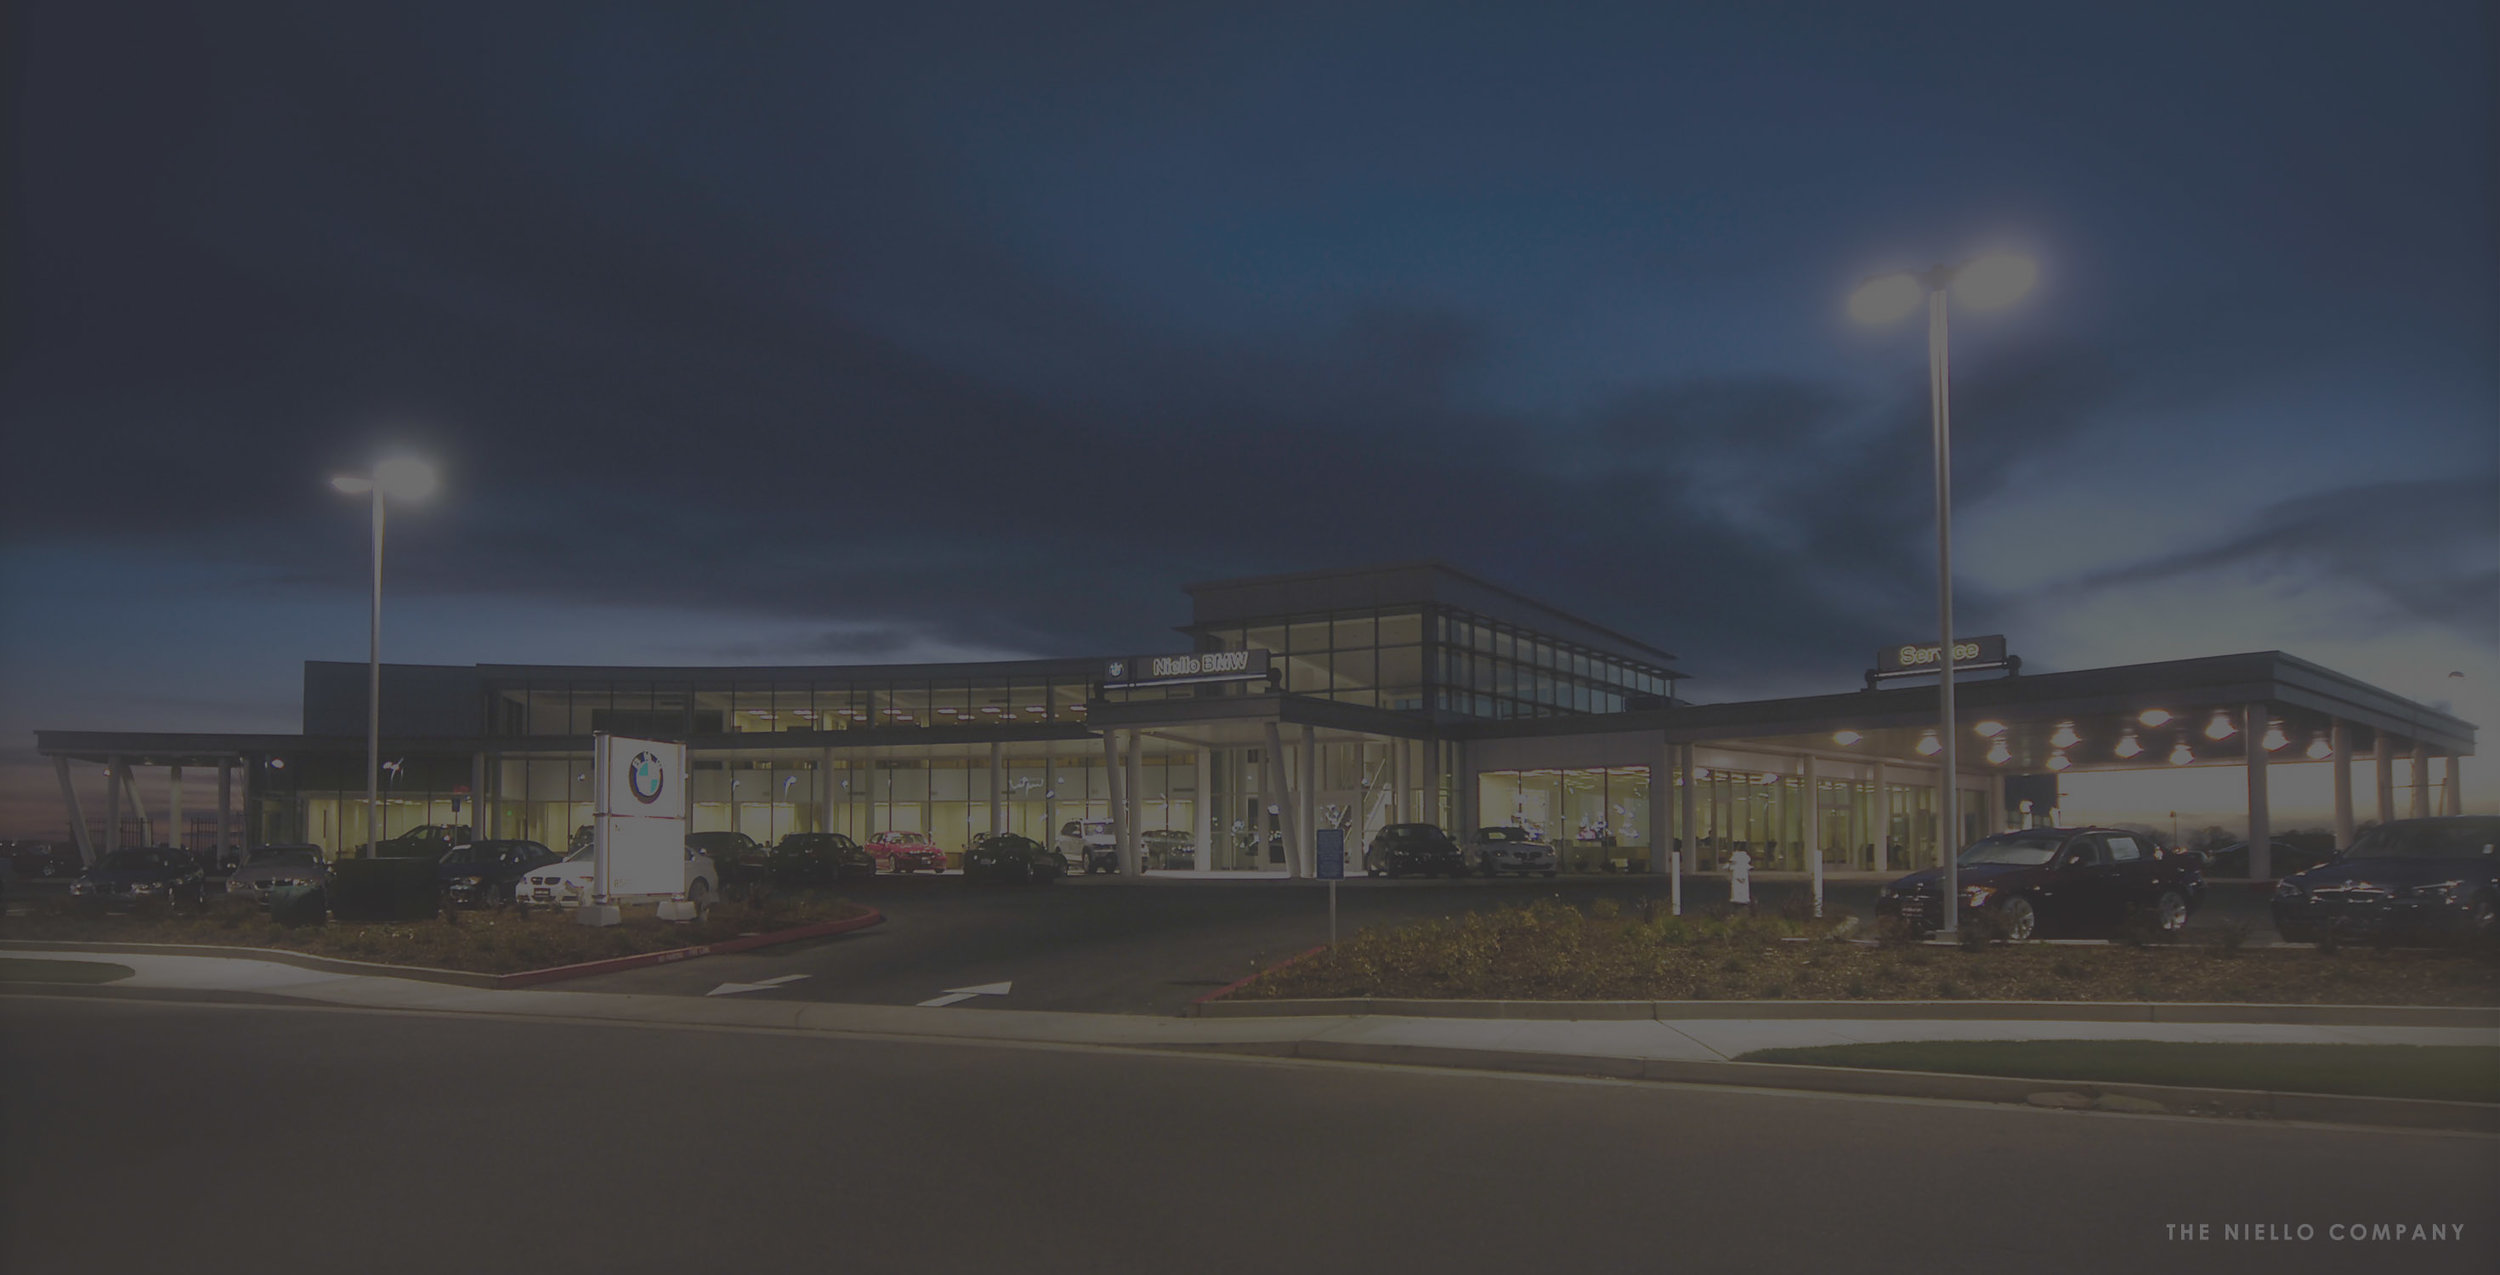  A new BMW facility in Elk Grove, California reflects the premium quality and elegance of the BMW vehicle design. With a total building area of 53,900 sq. ft., the curved exterior façade of the showroom and uniquely shaped, tower element are composed